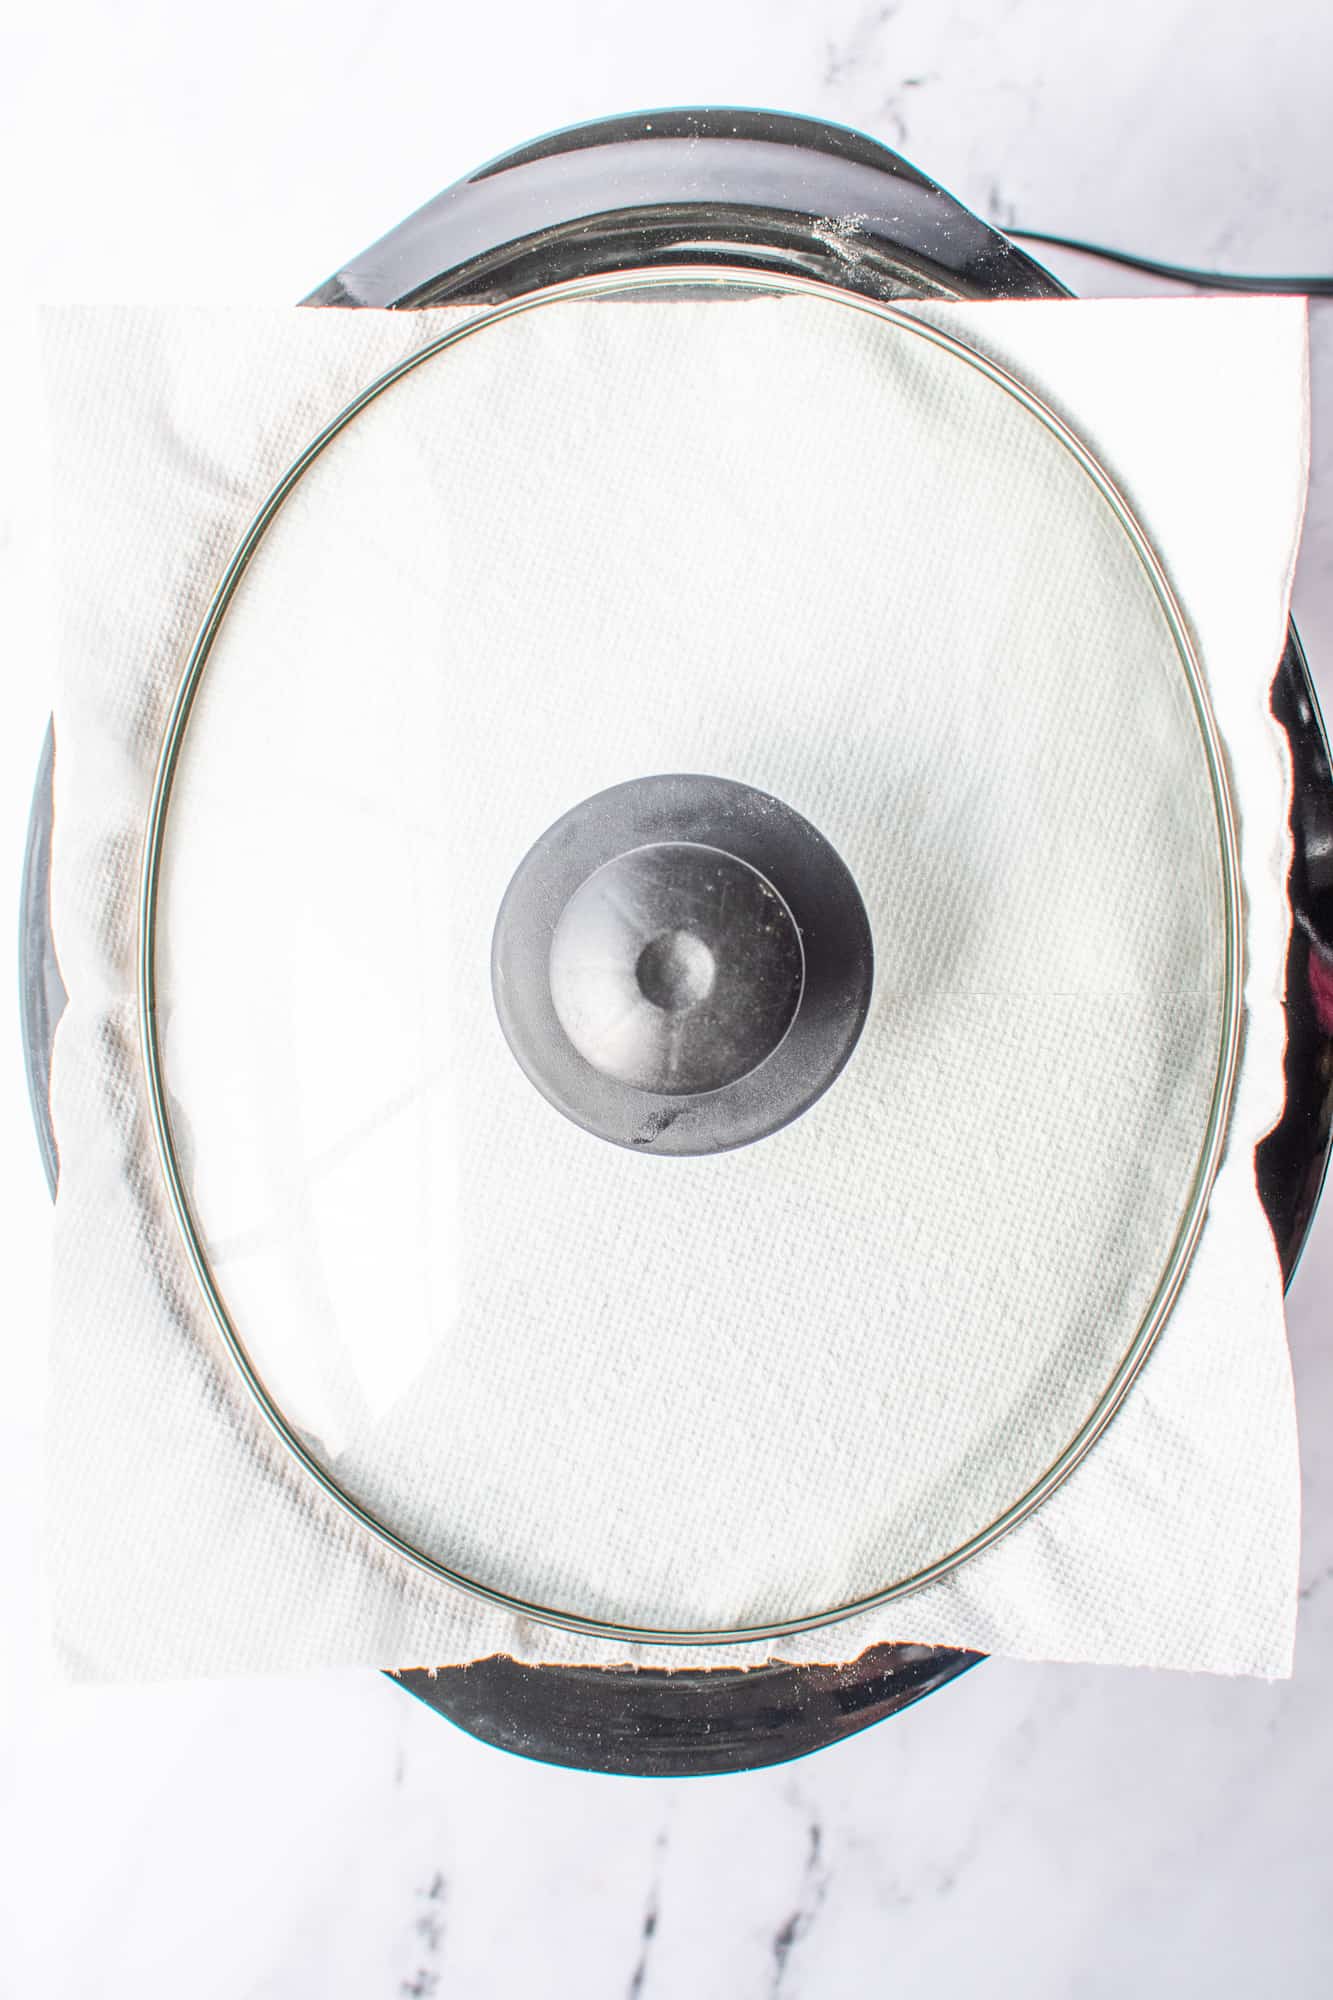 a covered slow cooker shown with a paper towel underneath the lid